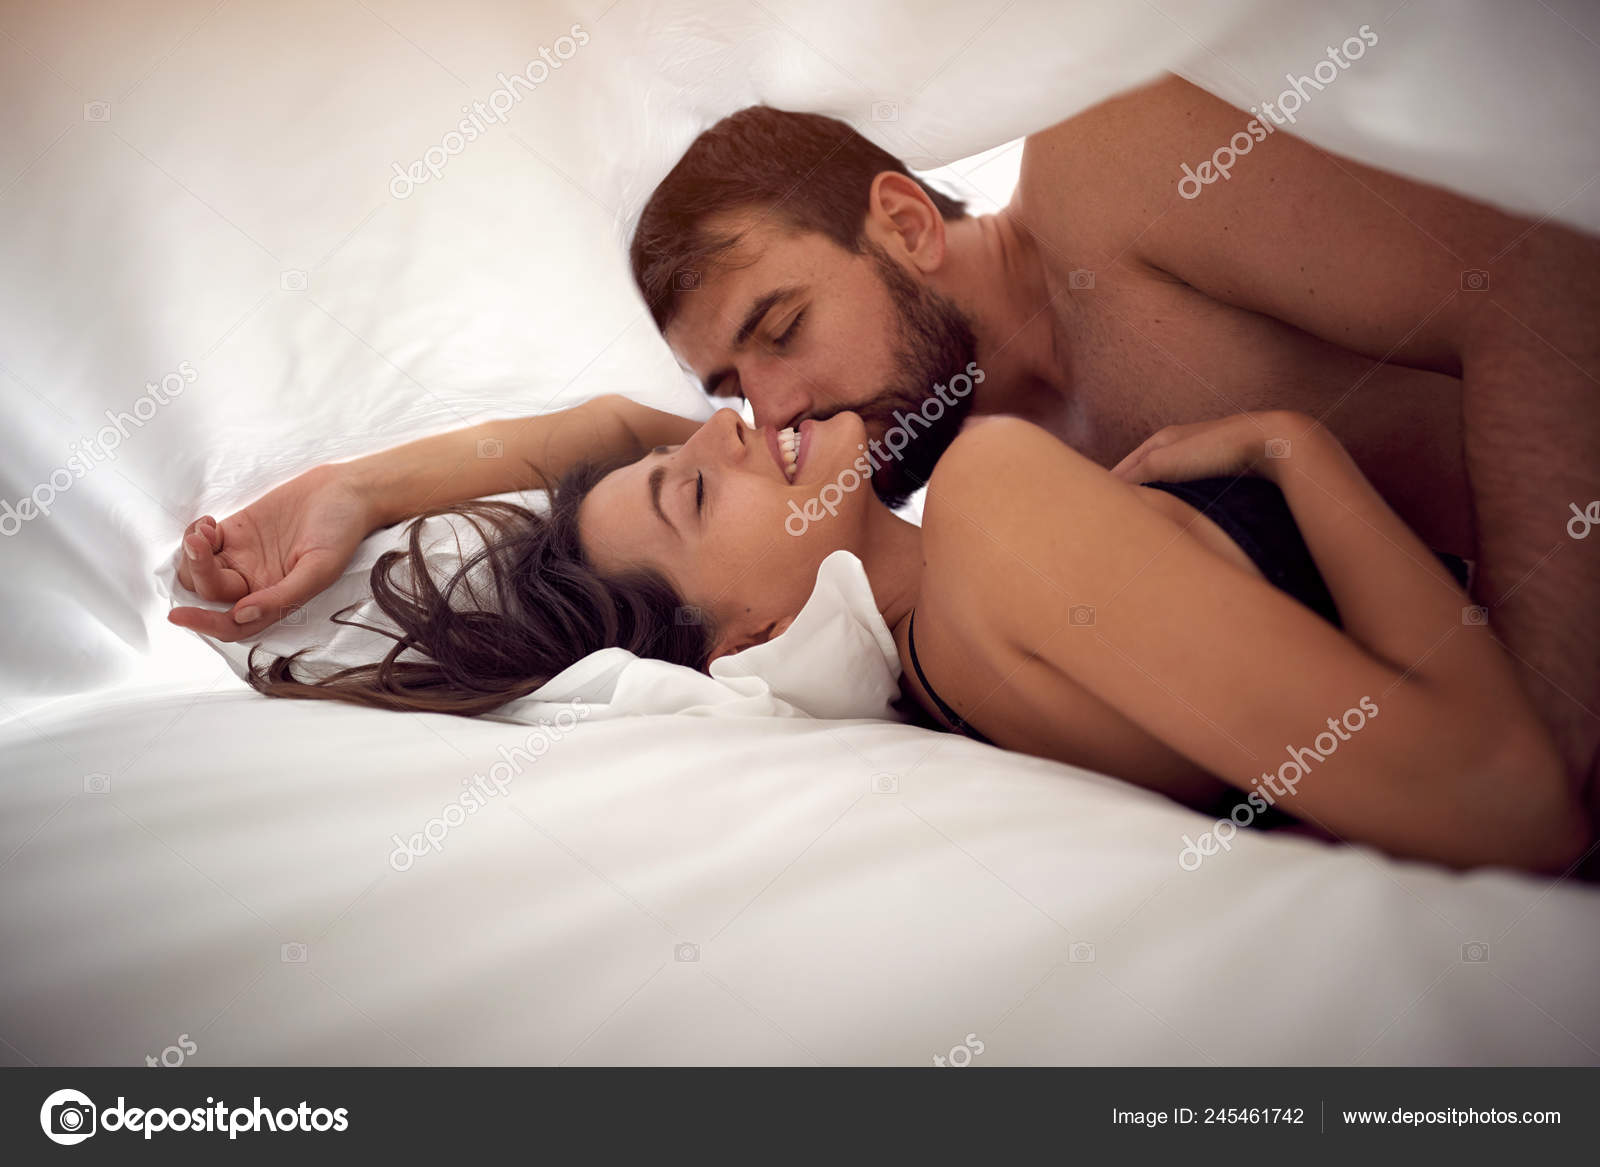 Young Loving Man Woman Making Love Bed Passionate Sex Stock Photo by ©luckybusiness 245461742 Sex Pic Hd